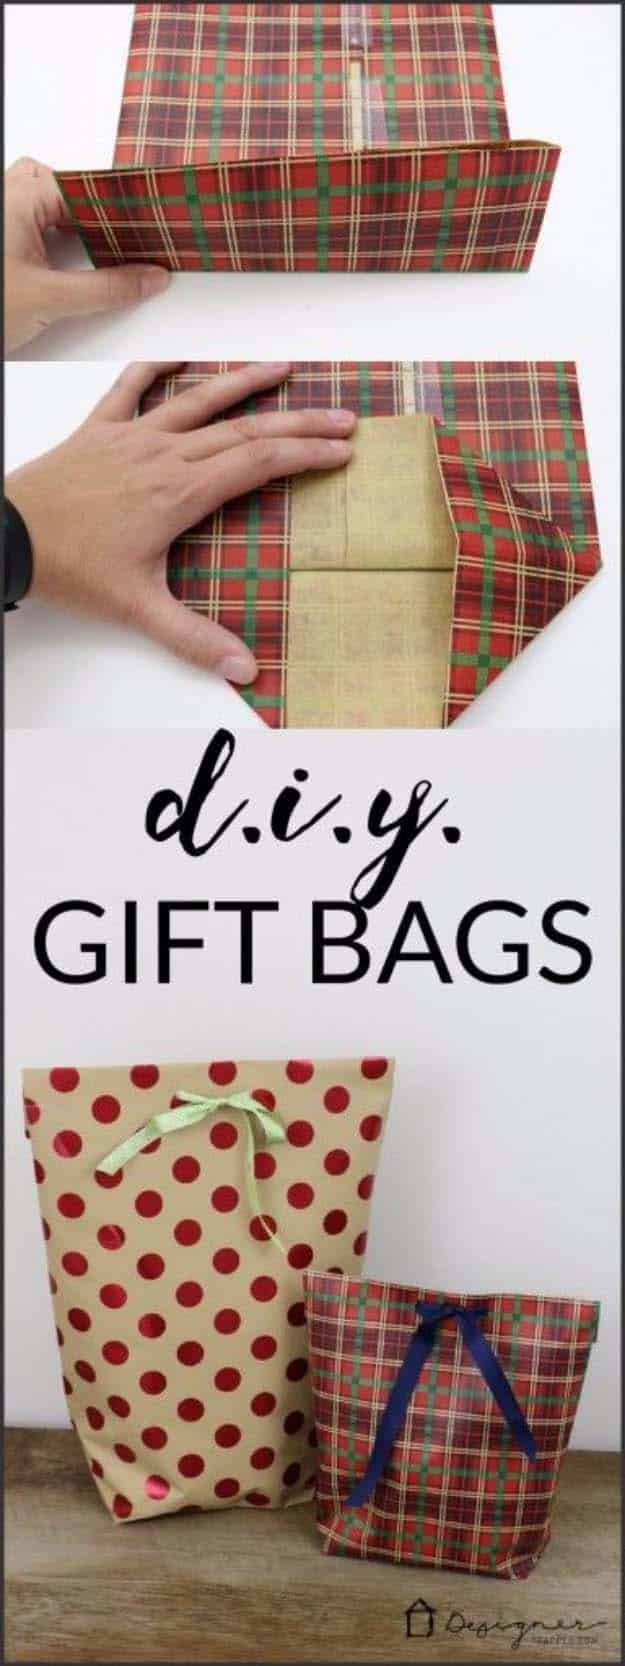 DIY Gift Wrapping Ideas - How To Wrap A Present - Tutorials, Cool Ideas and Instructions | Cute Gift Wrap Ideas for Christmas, Birthdays and Holidays | Tips for Bows and Creative Wrapping Papers | DIY Christmas Gift Bag #gifts #diys